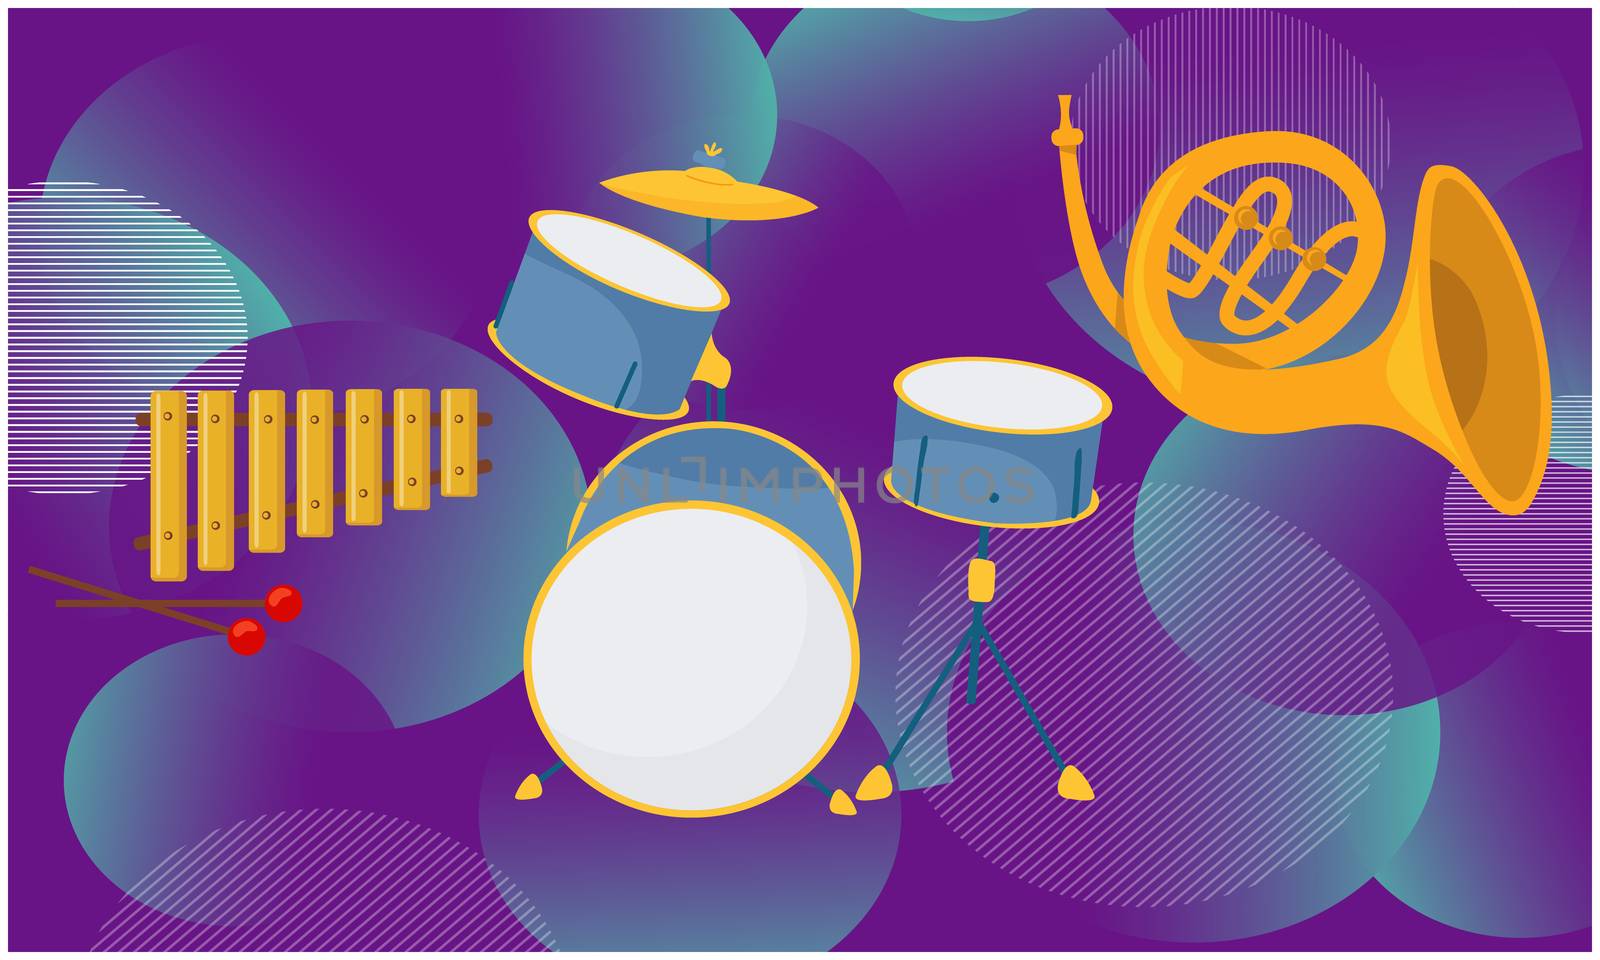 mock illustration of musical instruments on abstract backgrounds by aanavcreationsplus